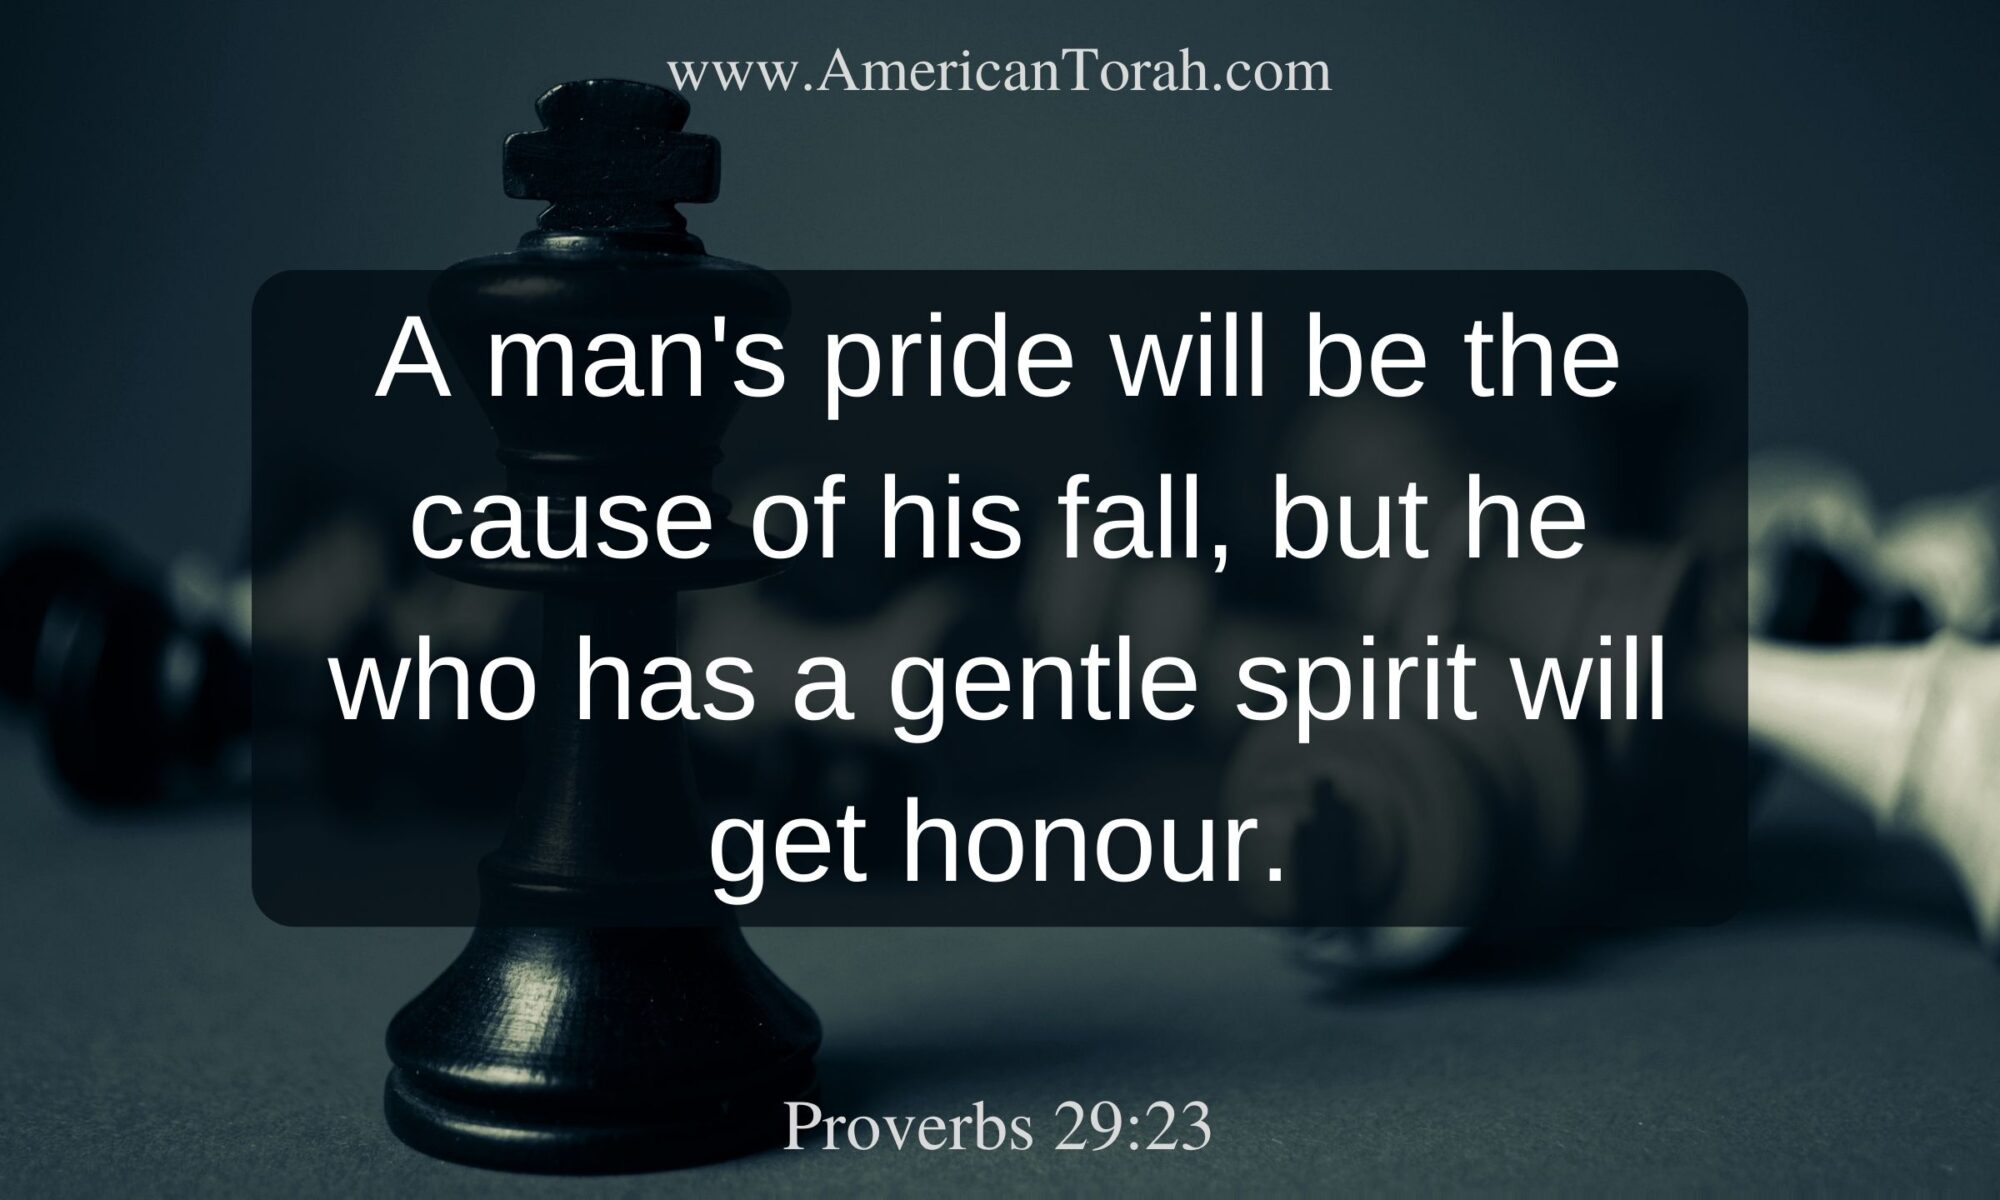 Proverbs 29:23  One's pride will bring him low, but he who is lowly in spirit will obtain honor.